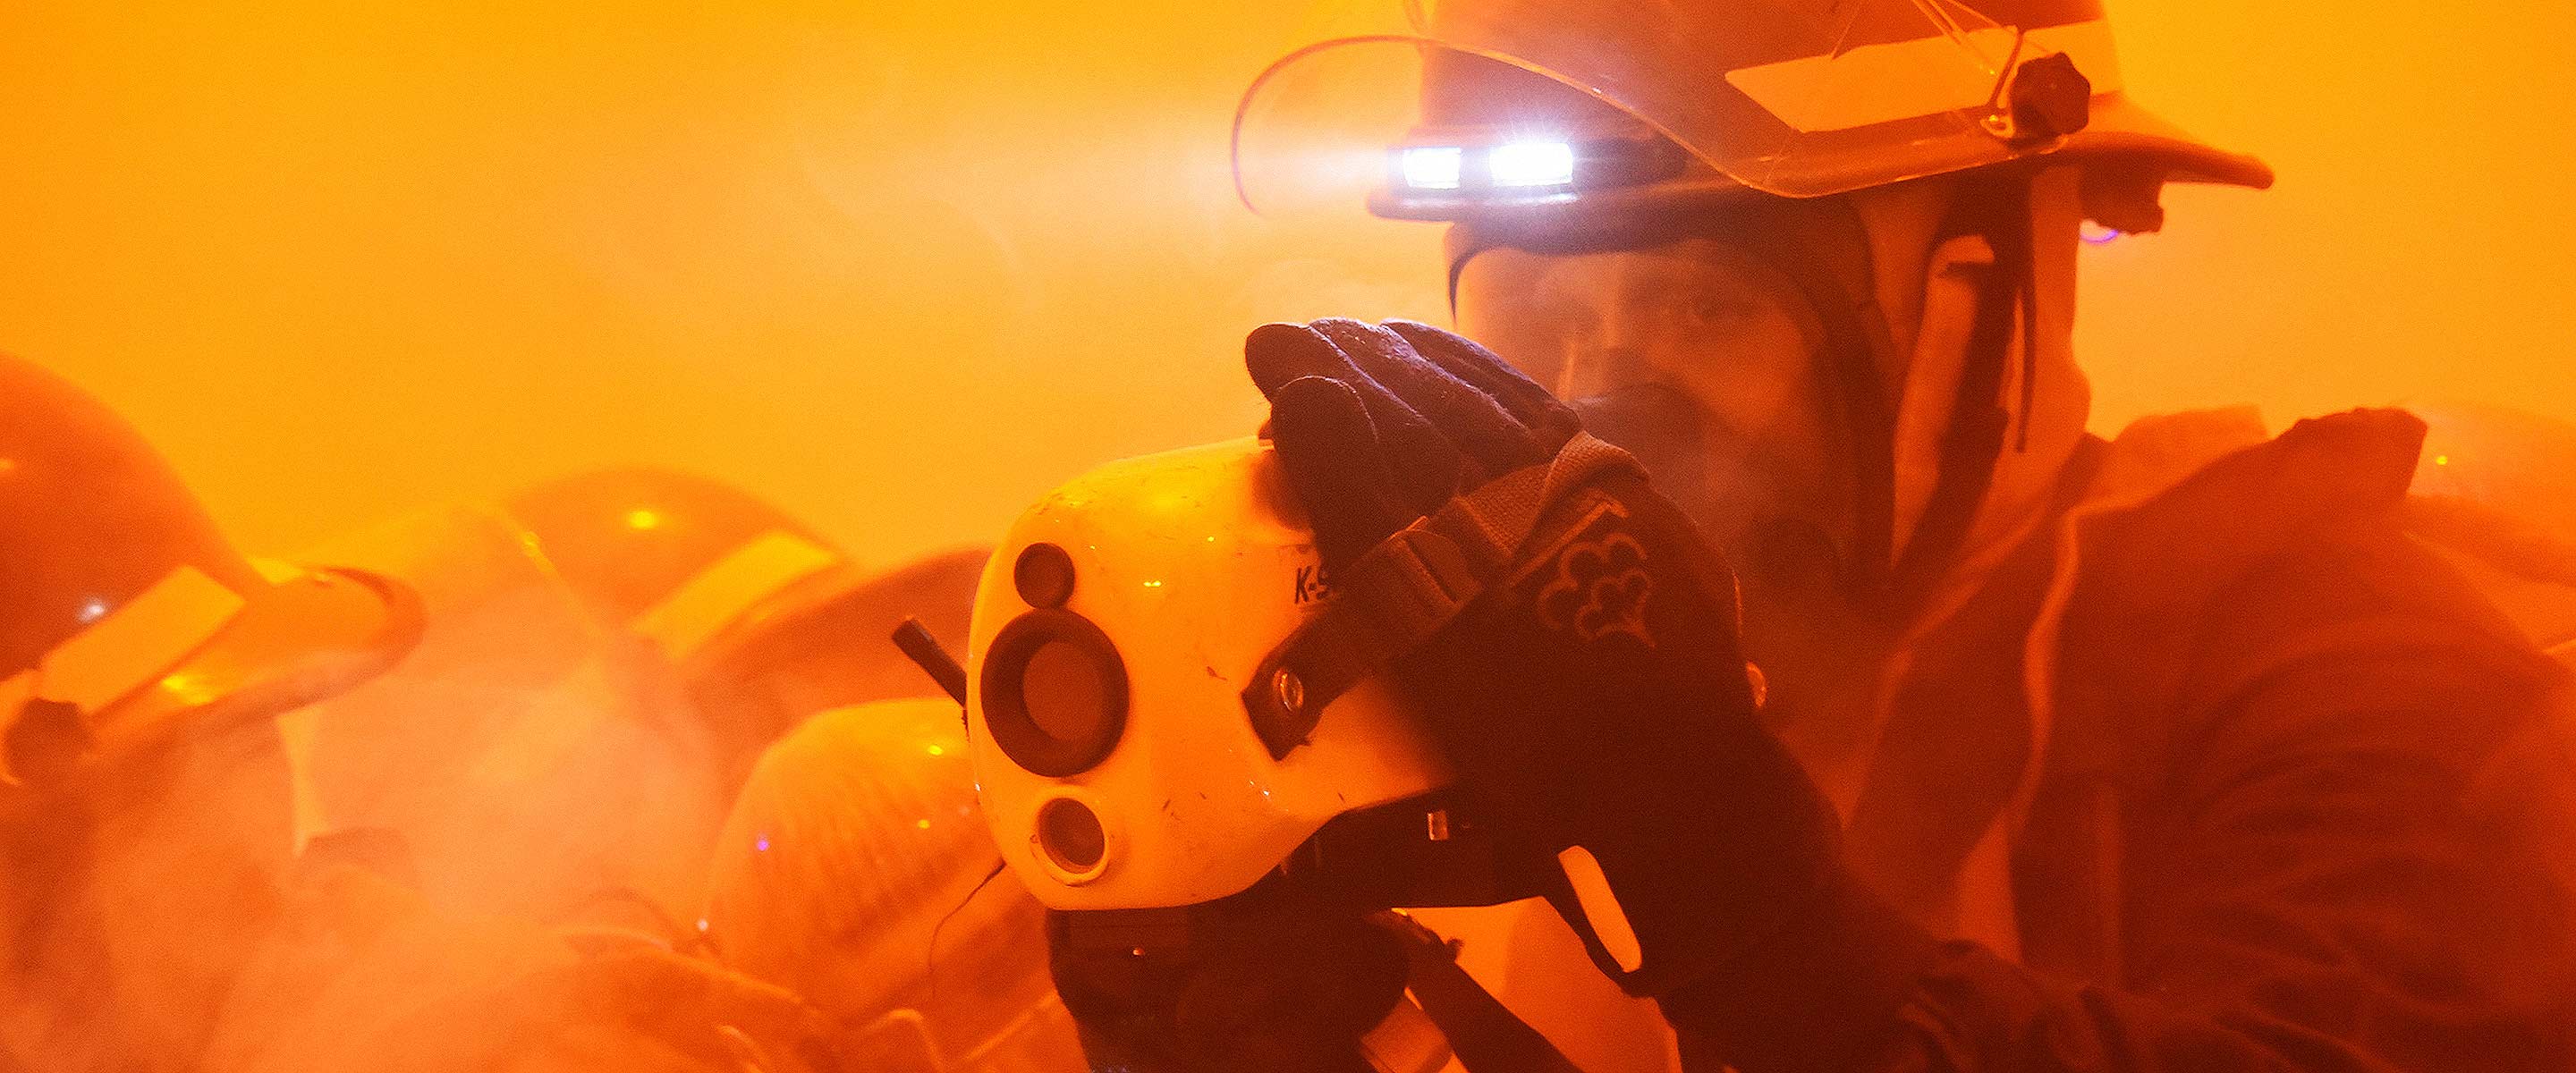 Military Emergency, Firefighter & Rescue Careers - Navy.com